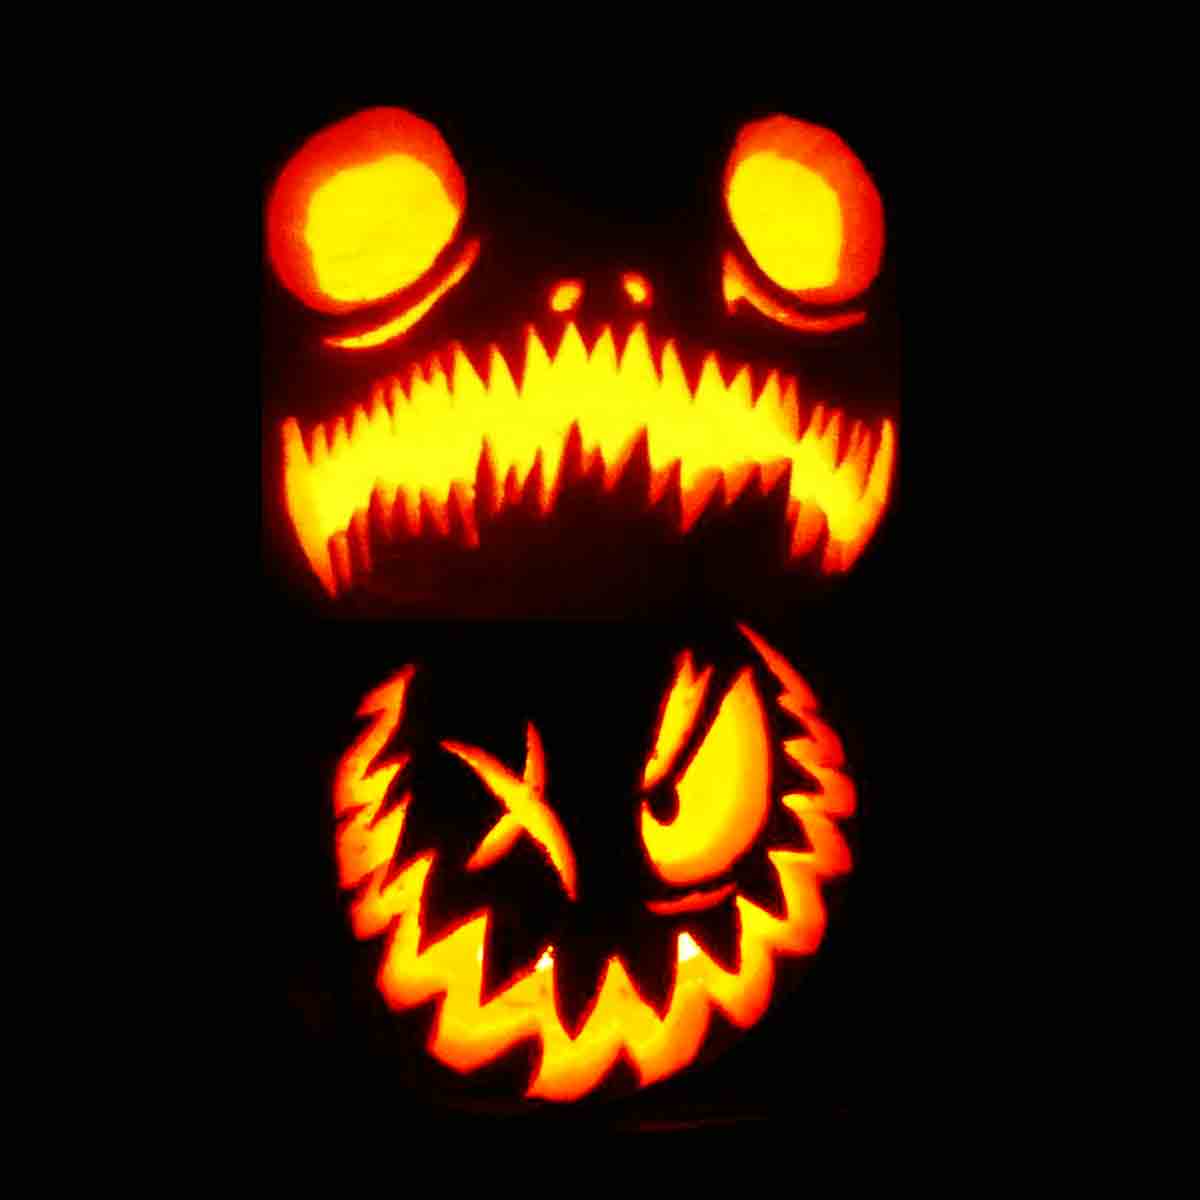 25 Halloween Scary Face Pumpkin Carving Ideas 2020 For Kids Adults 